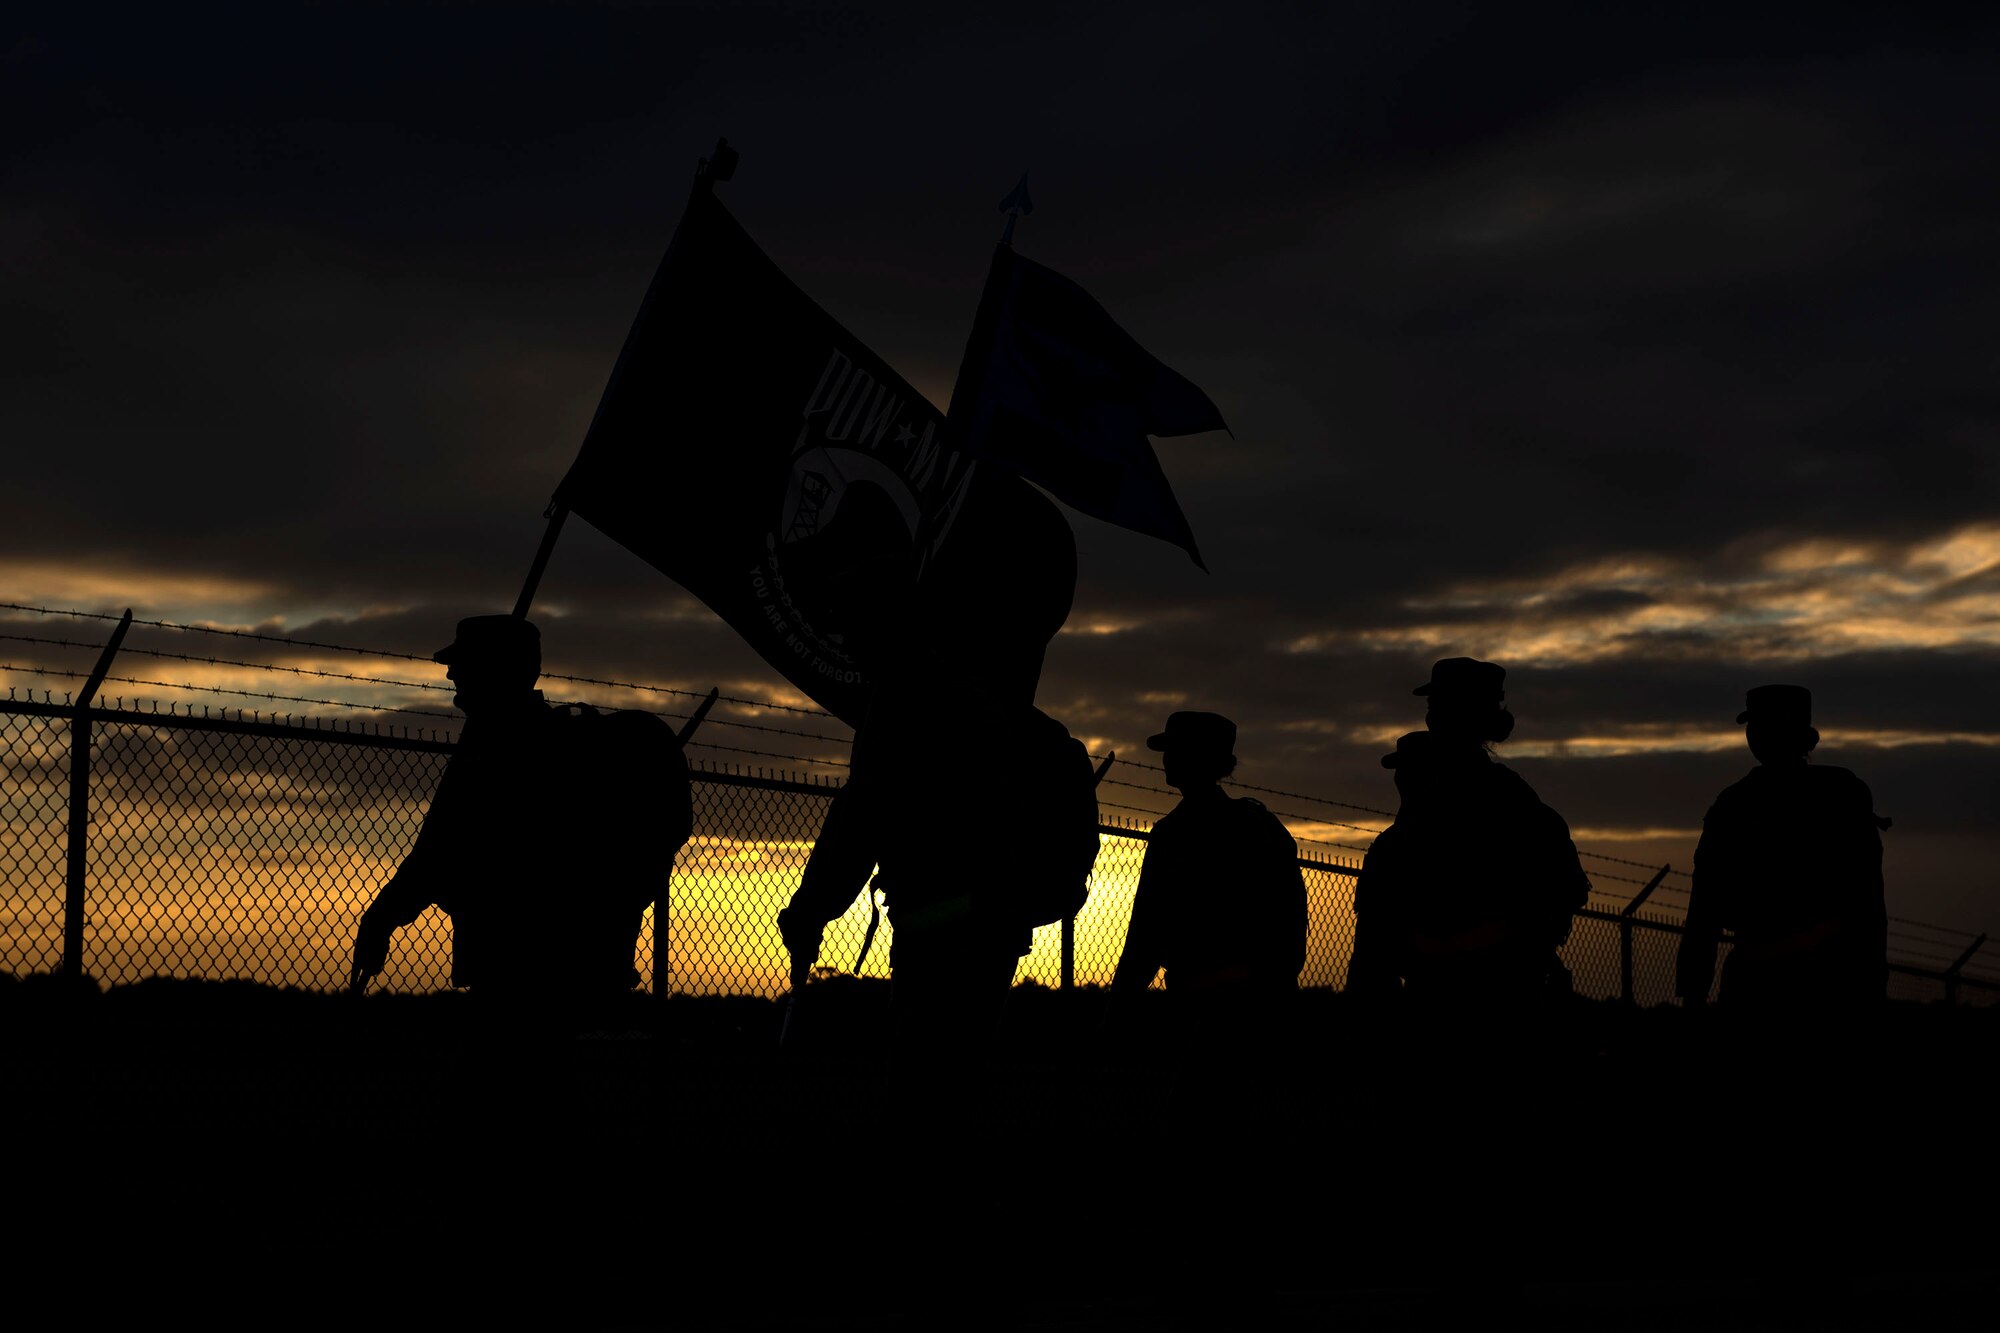 Airmen from the 476th Fighter Group participate in the POW/MIA Recognition Day ruck march Sept. 20, 2019, at Moody Air Force Base, Ga. In 1979, the United States Congress passed a resolution authorizing National POW/MIA Recognition Day to be observed together with the national effort of bringing isolated personnel home. The 347th Operations Support Squadron hosted the 24-hour ruck march to pay tribute to those who’ve been captured or missing in the line of duty. (U.S. Air Force photo by Senior Airman Erick Requadt)